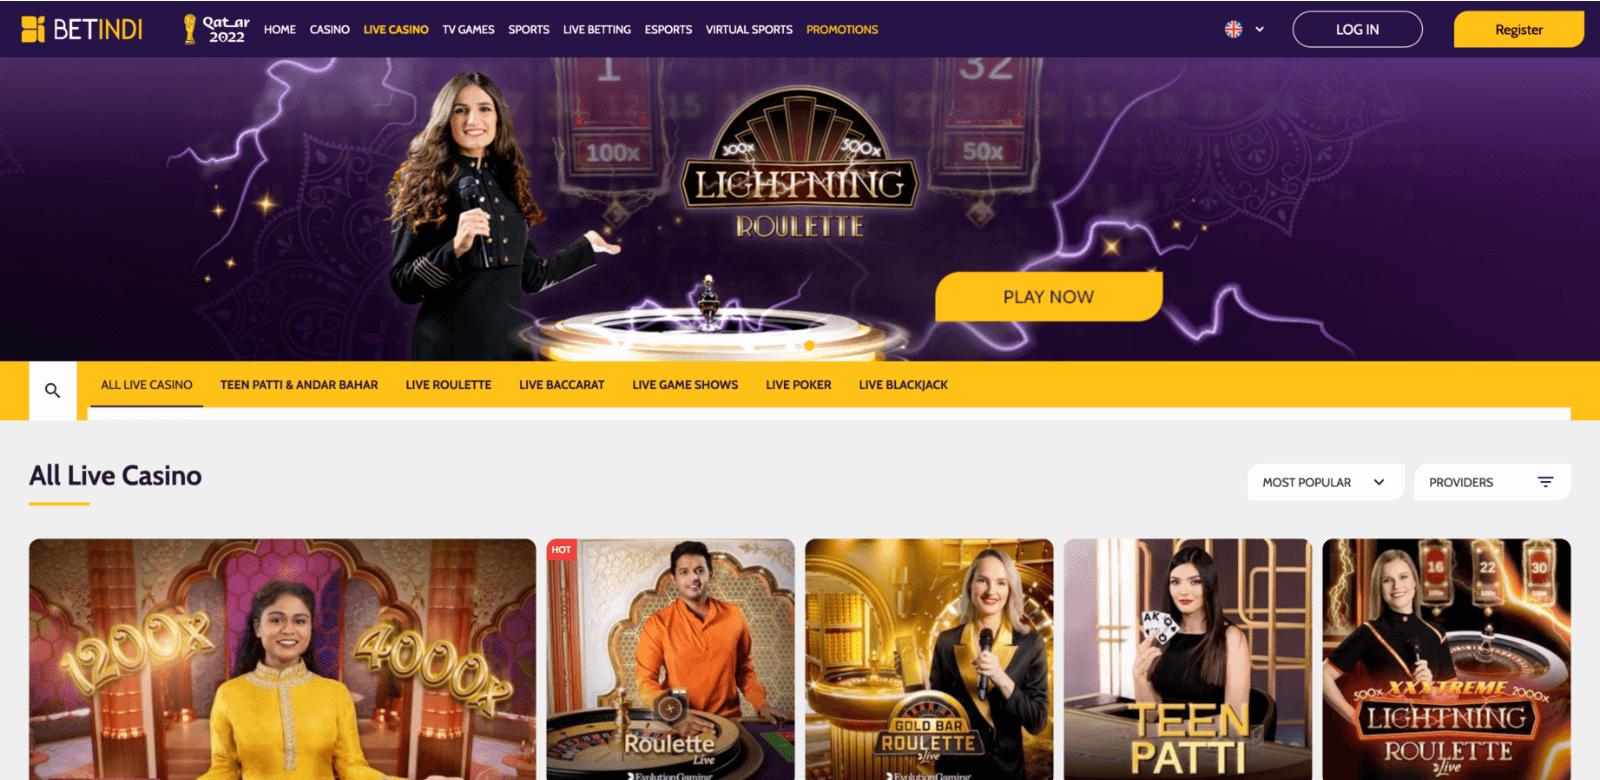 In Betindi live casino you can play a variety of gambling games with live dealers